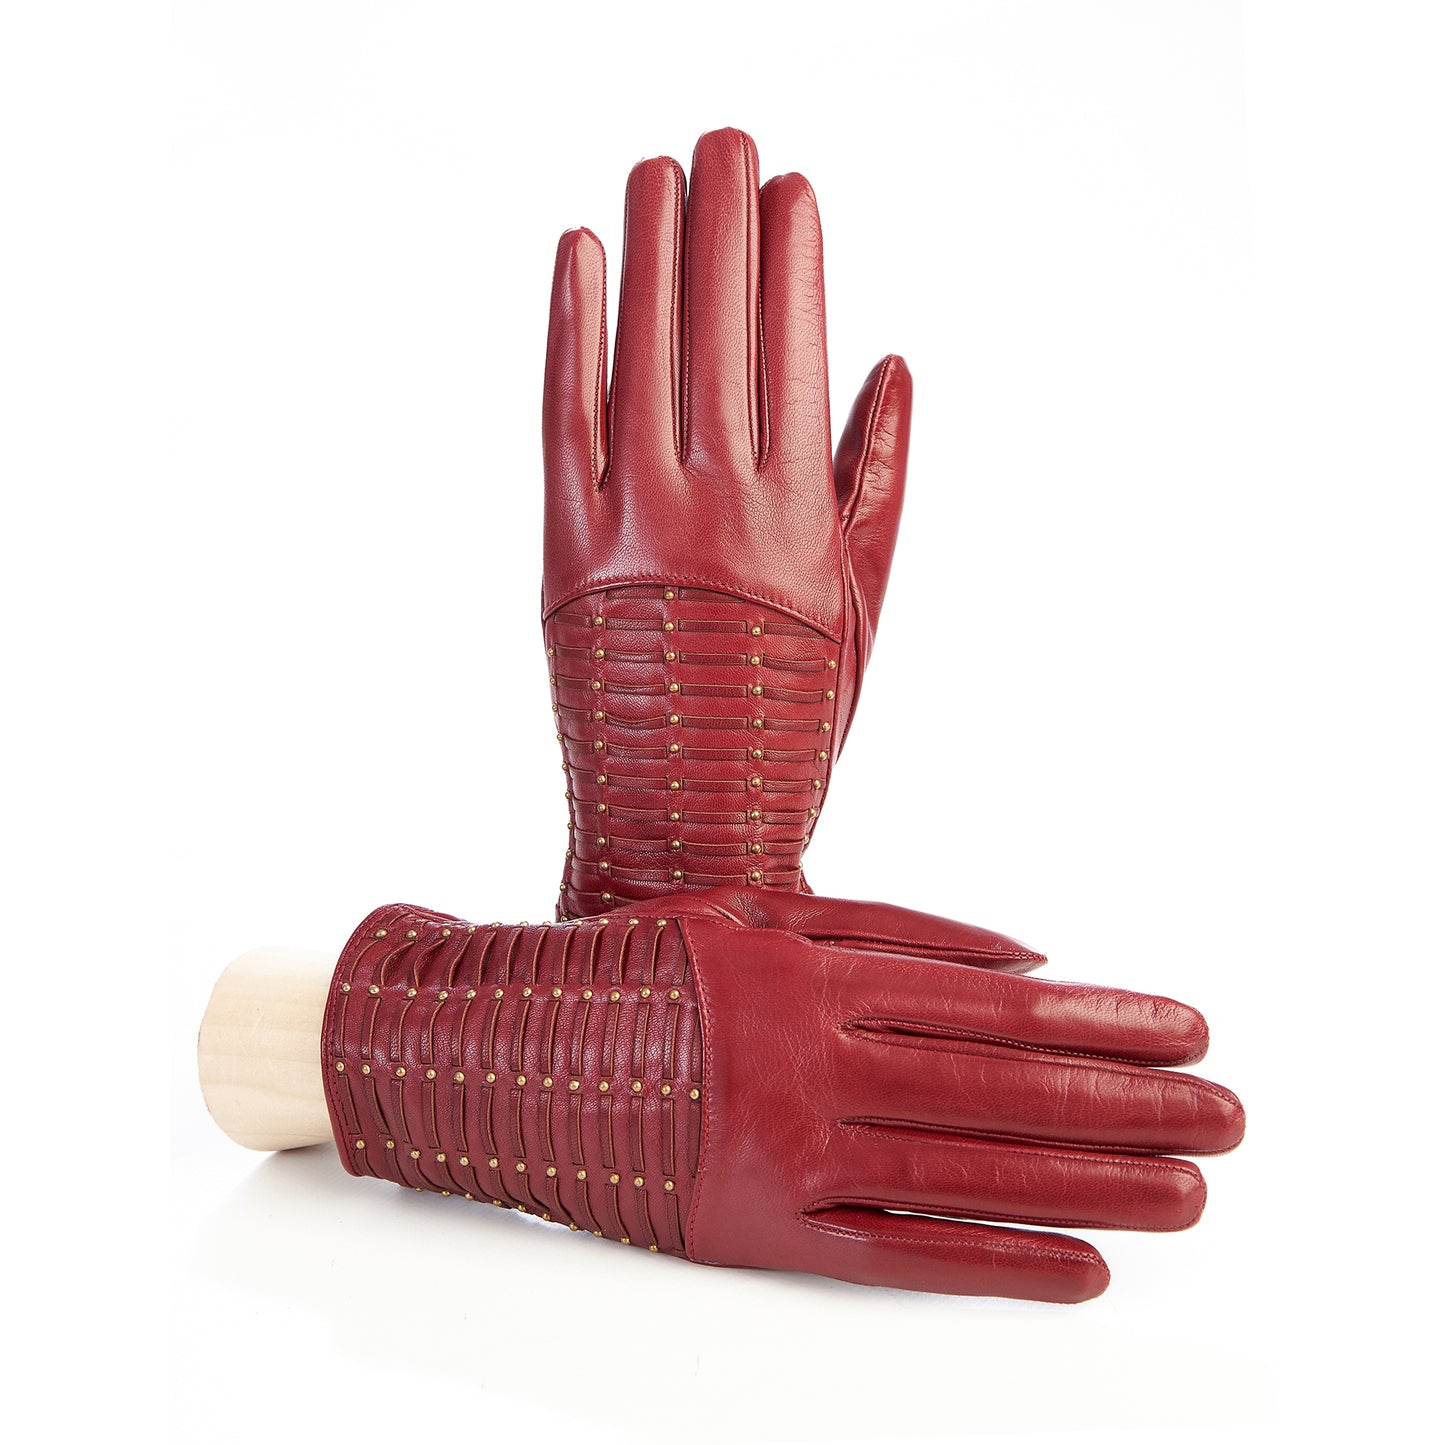 Womens' red leather gloves with studs and woven leather handmade